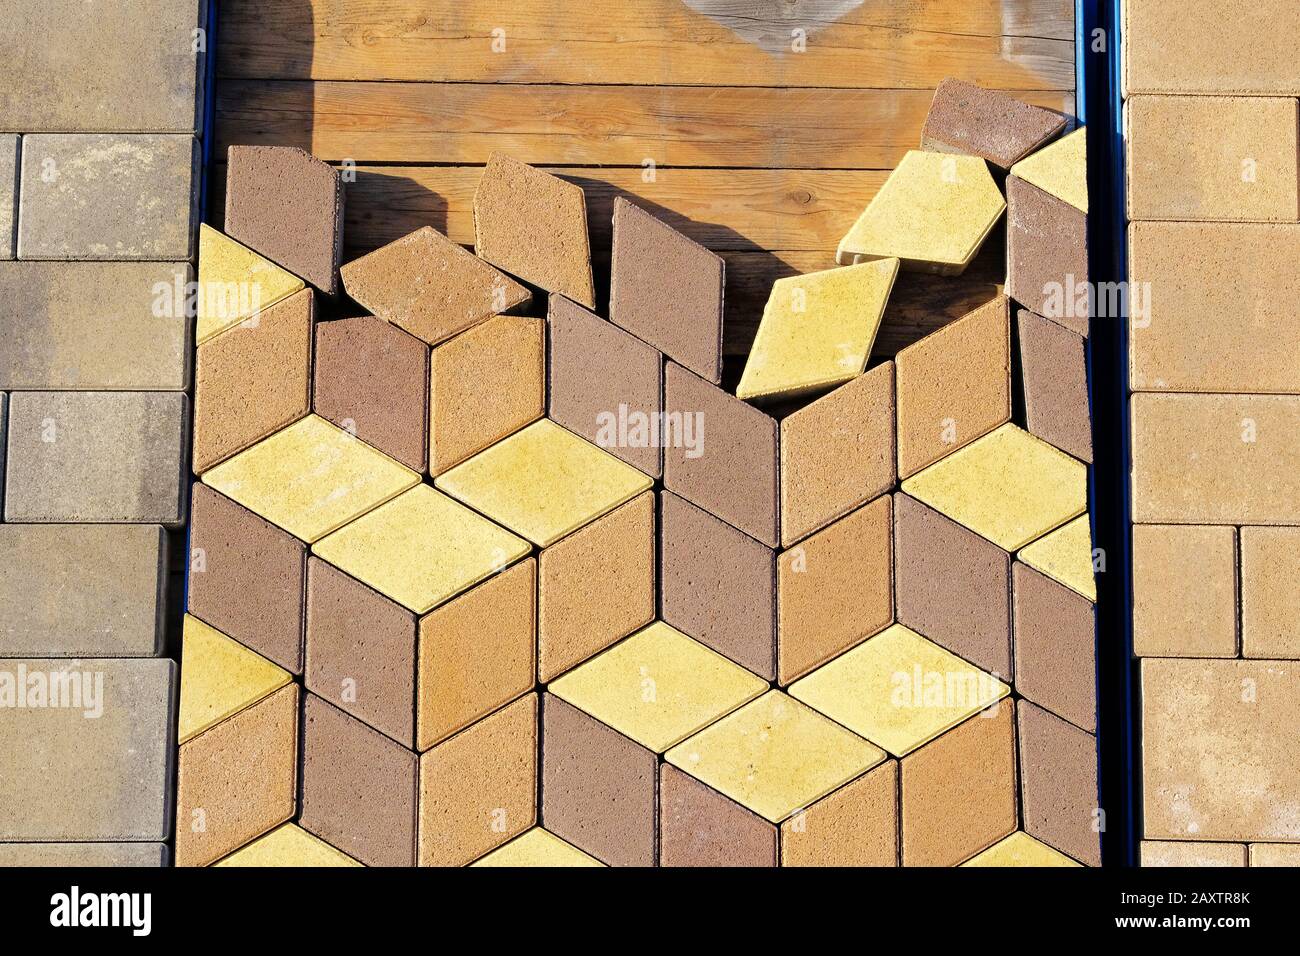 Brown and yellow stone of pavement  at construction site. Warehouse paving slabs for laying road. Construction of sidewalks. Stock Photo